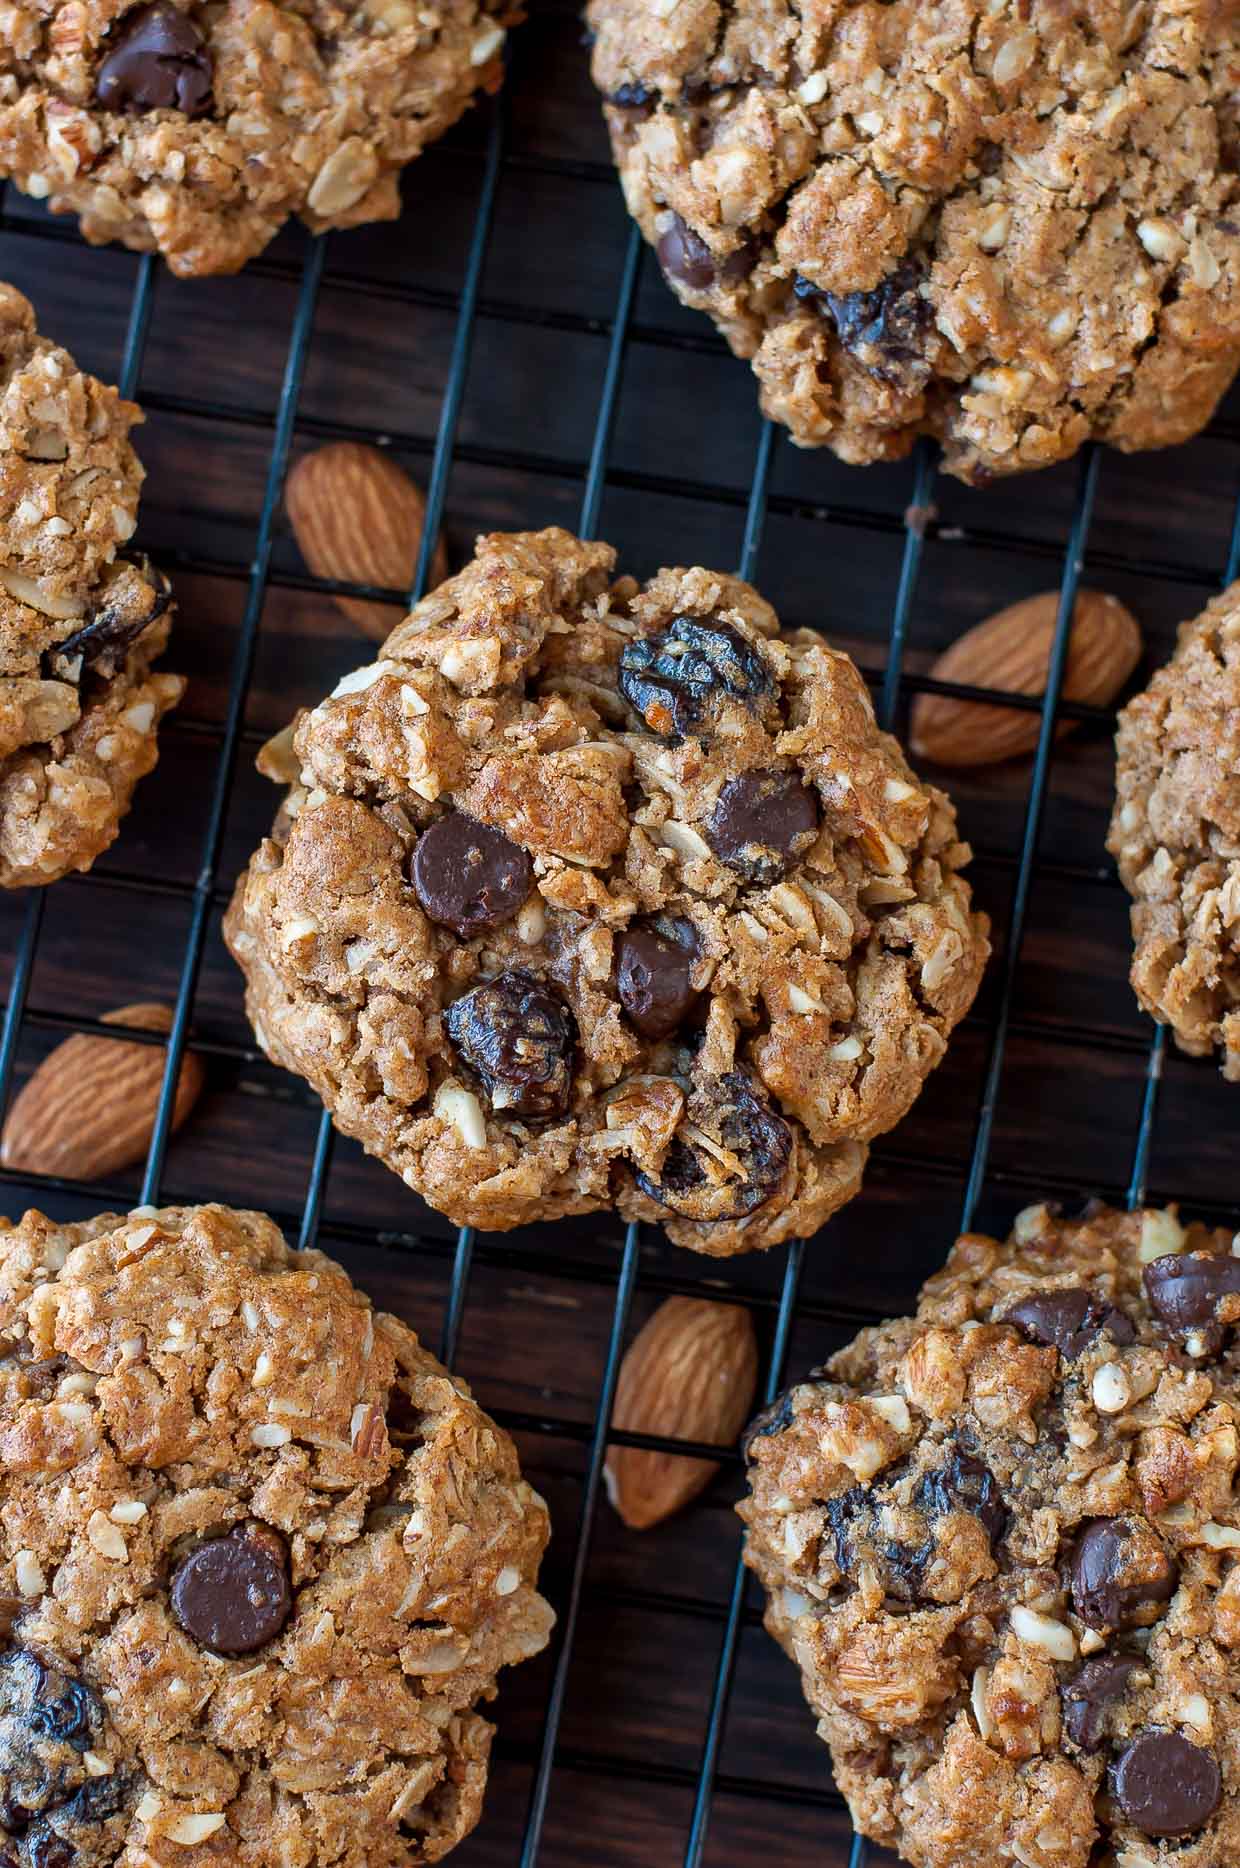 C is for COOKIES!!!!! These healthy Gluten-Free Chocolate Cherry Oatmeal Cookies are packed with simple ingredients for a delicious snack that'll help you power through your day!